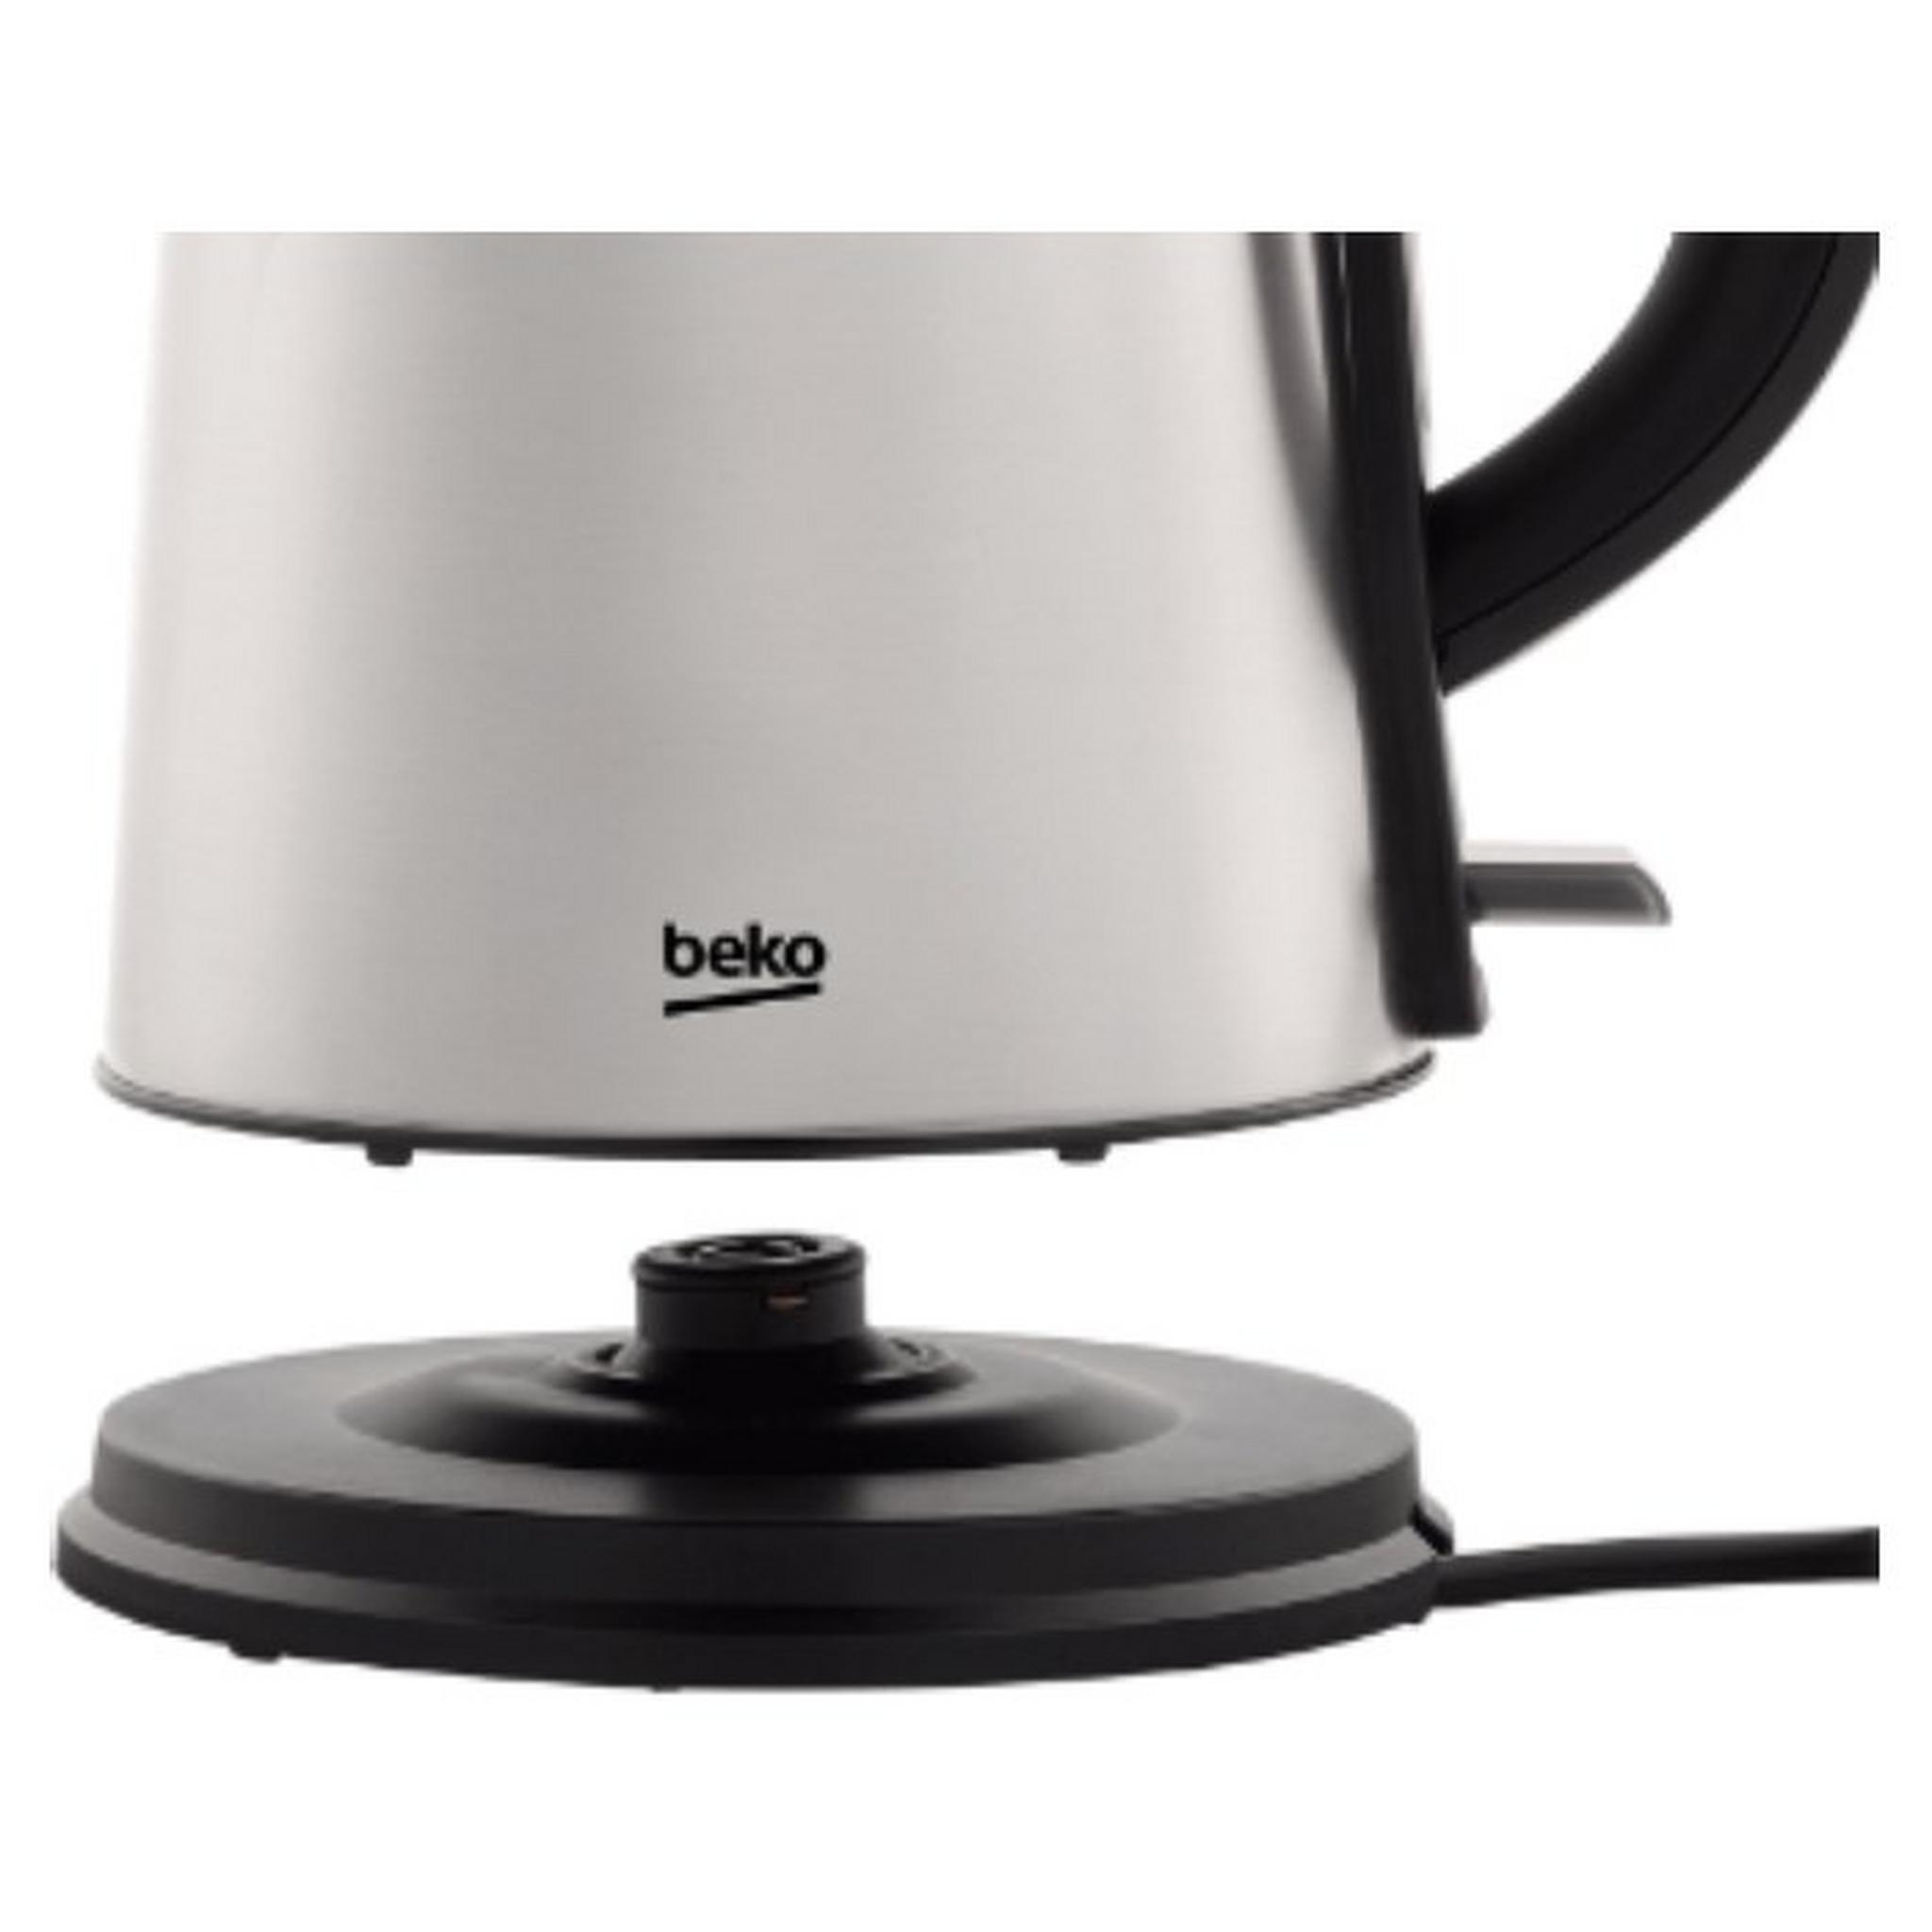 Beko Water Kettle, 1.7 L Capacity, 2200 Watts, WKM6226I - Stainless Steel